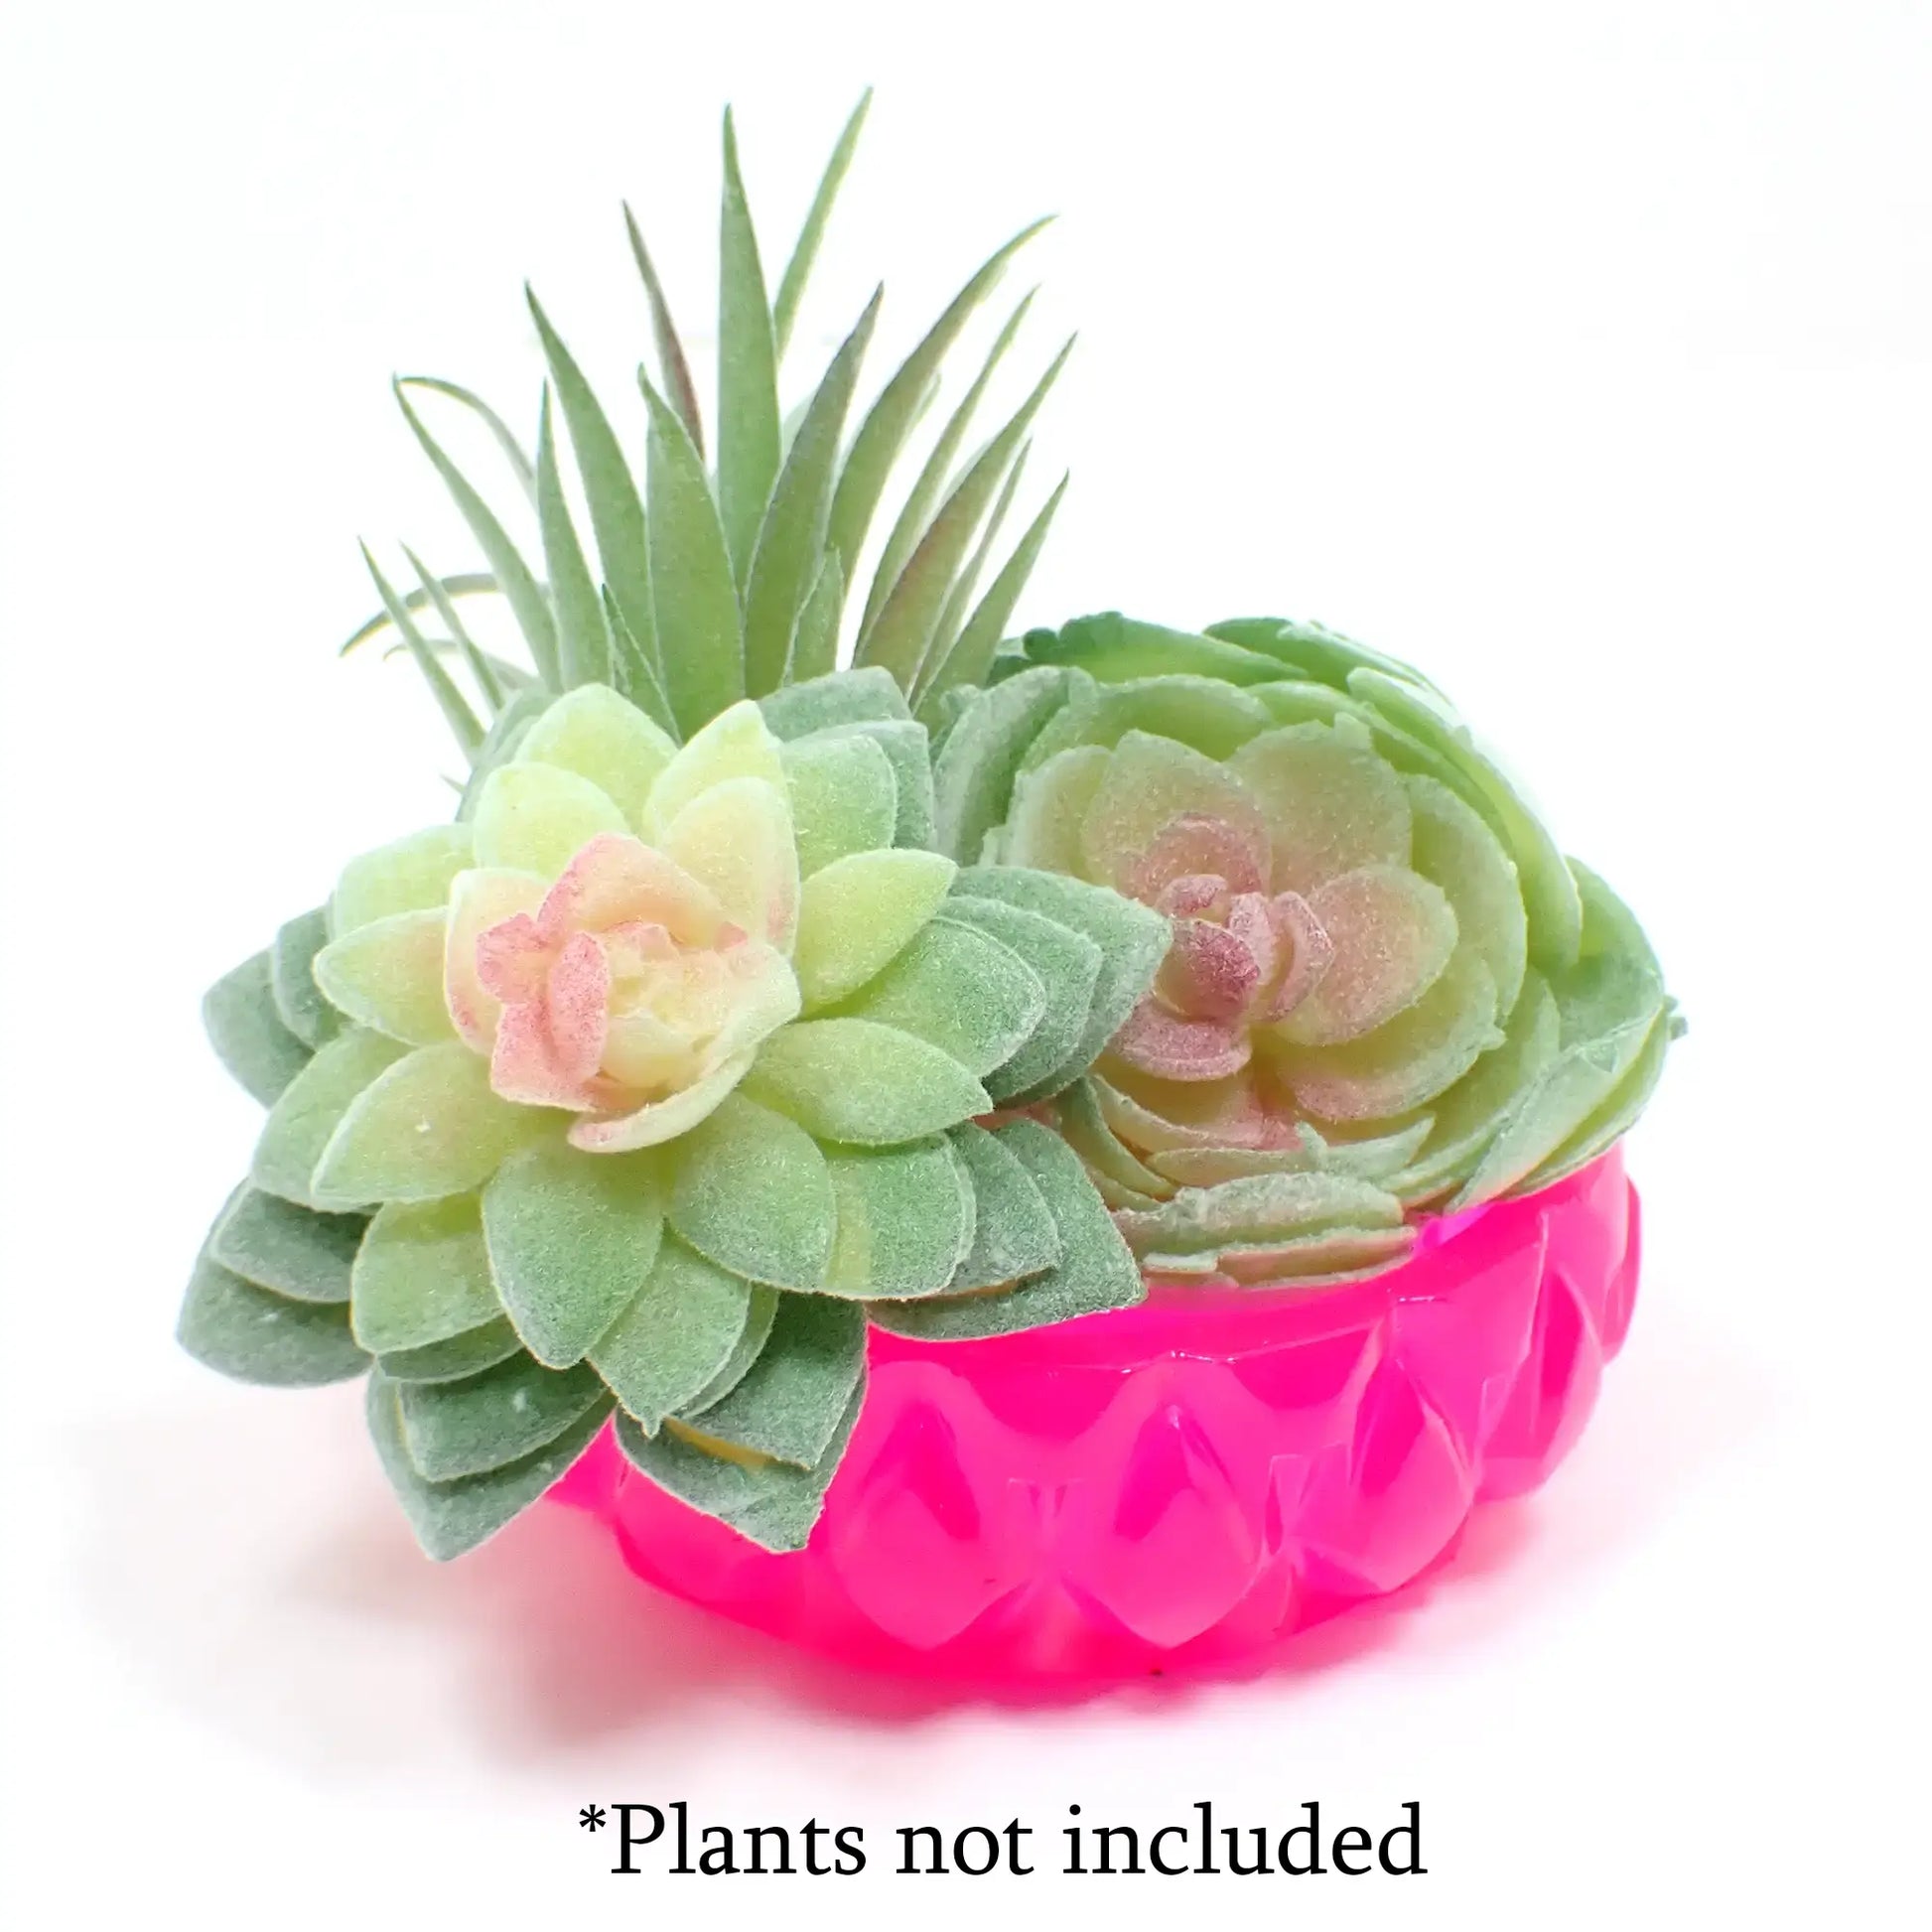 Side view of the small short round handmade resin succulent pot holding small fake plants. There is wording at the bottom "Plants not included."